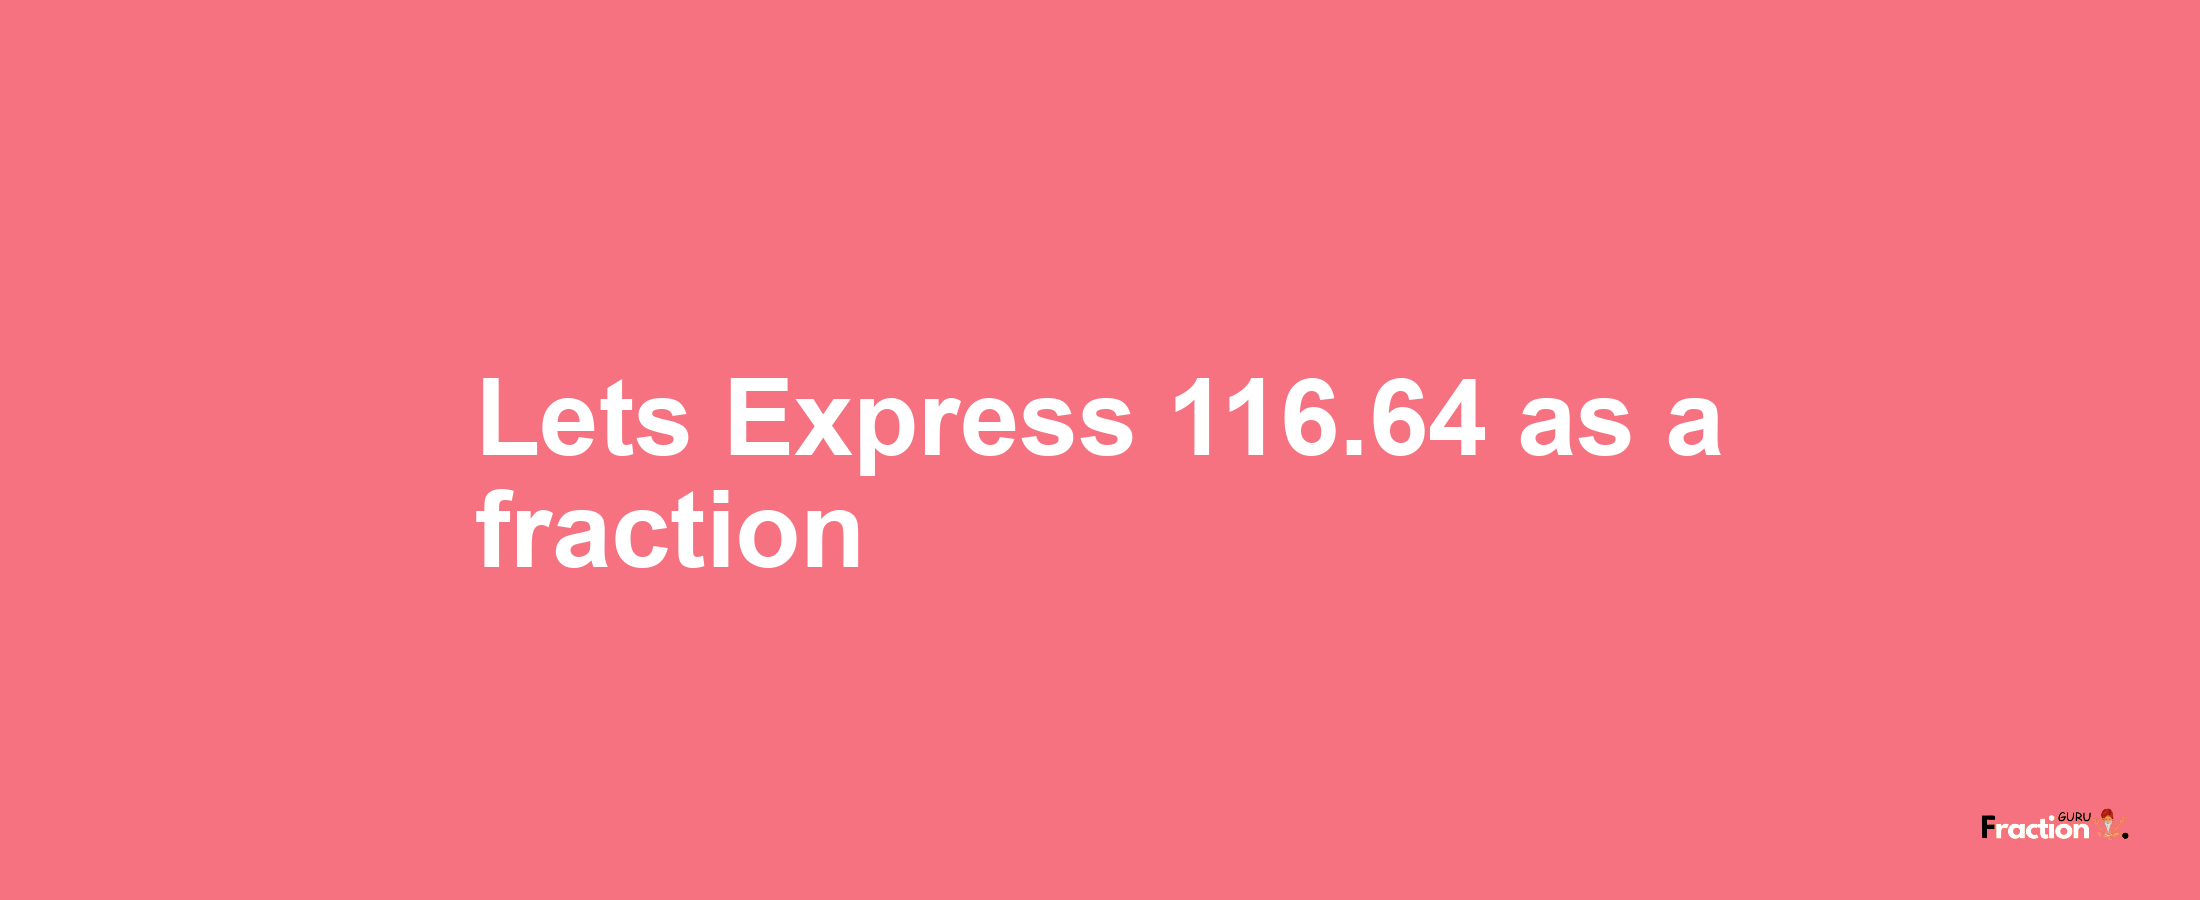 Lets Express 116.64 as afraction